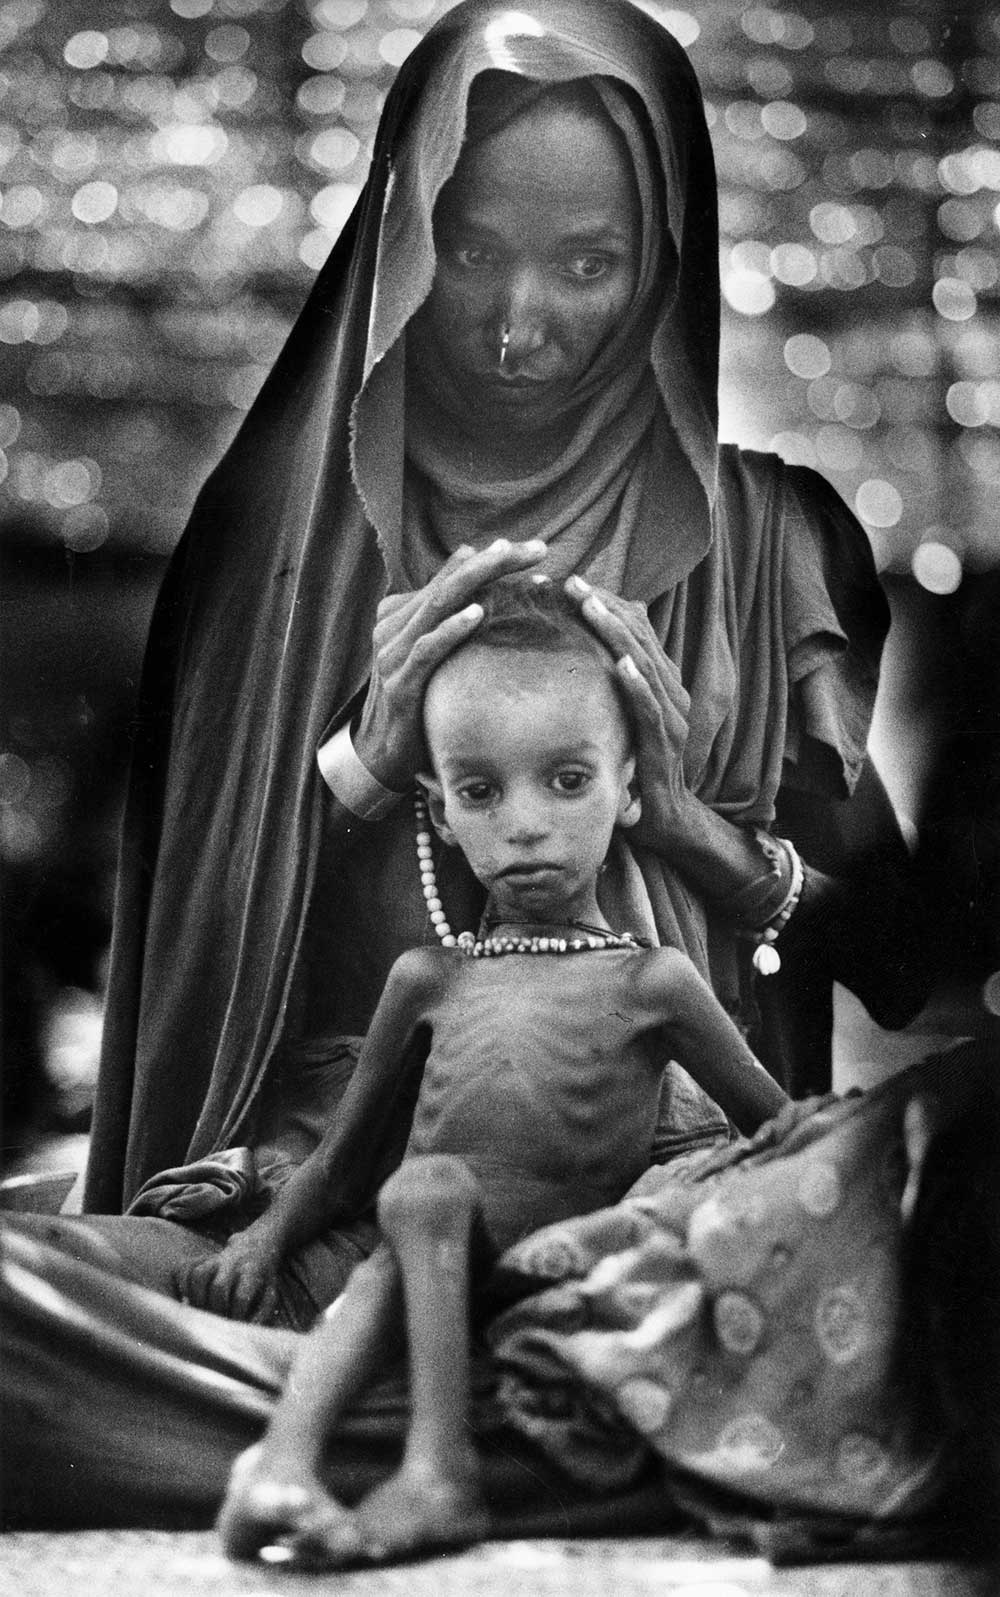 An Ethiopian mother and child await food in a Sudanese refugee camp in 1984